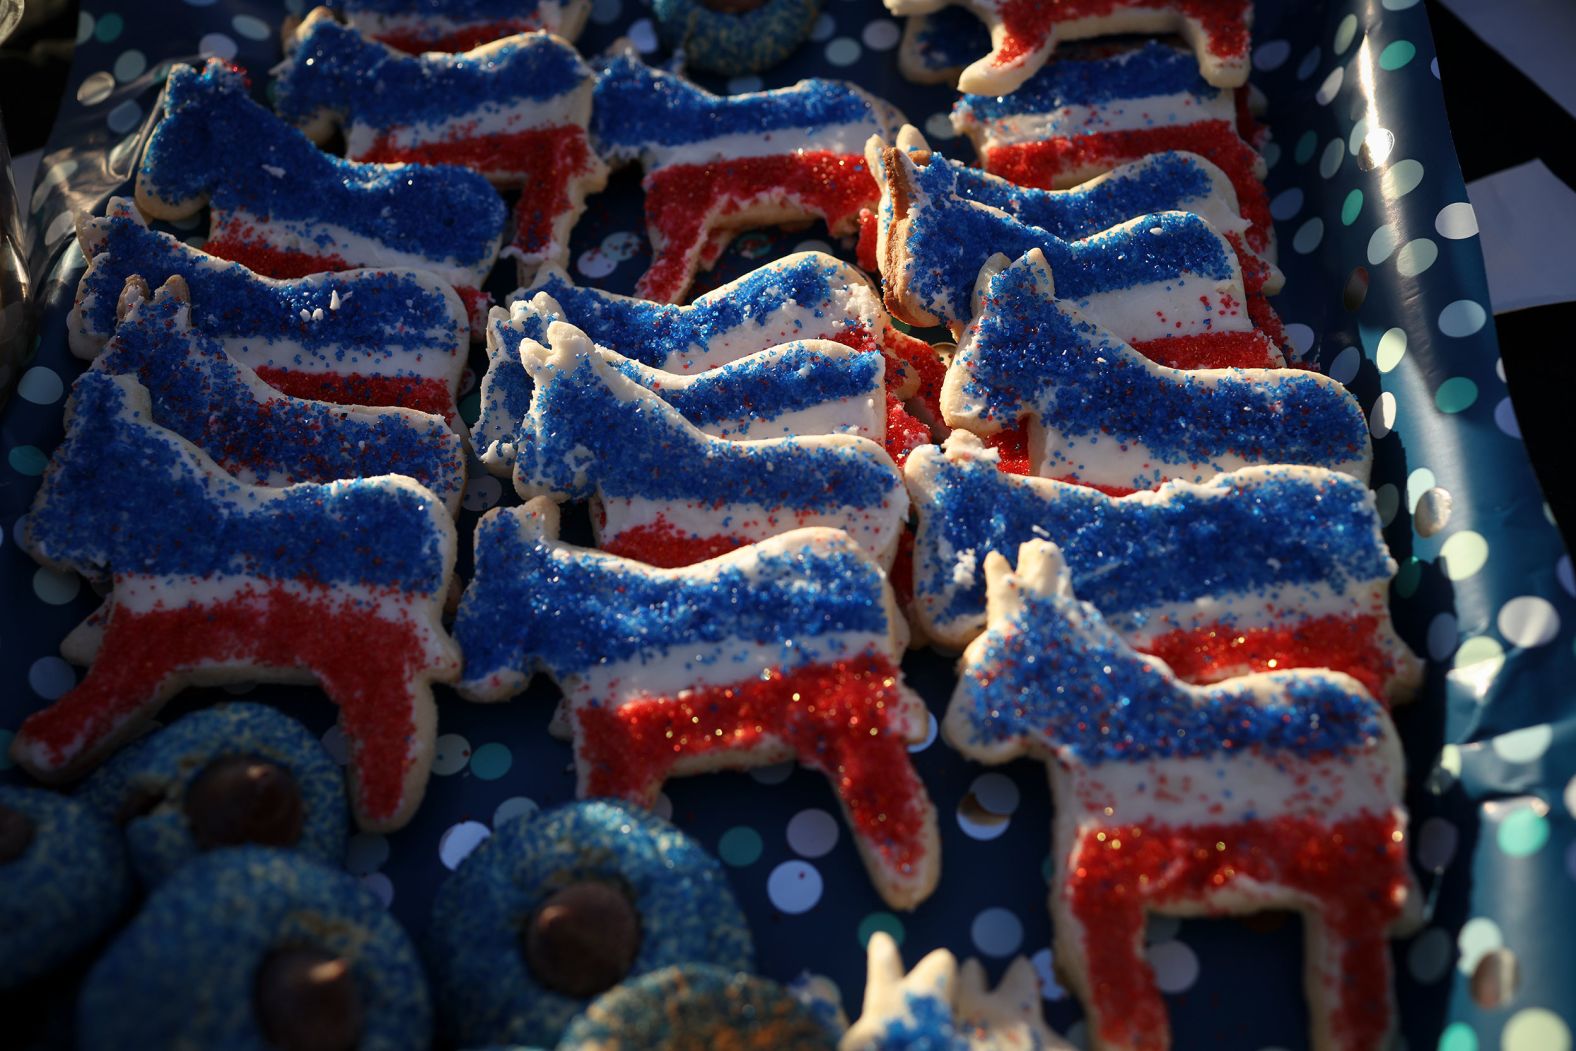 Donkey-shaped cookies are laid out by members of the Pennsylvania Democratic Party outside a polling location in Bryn Athyn.